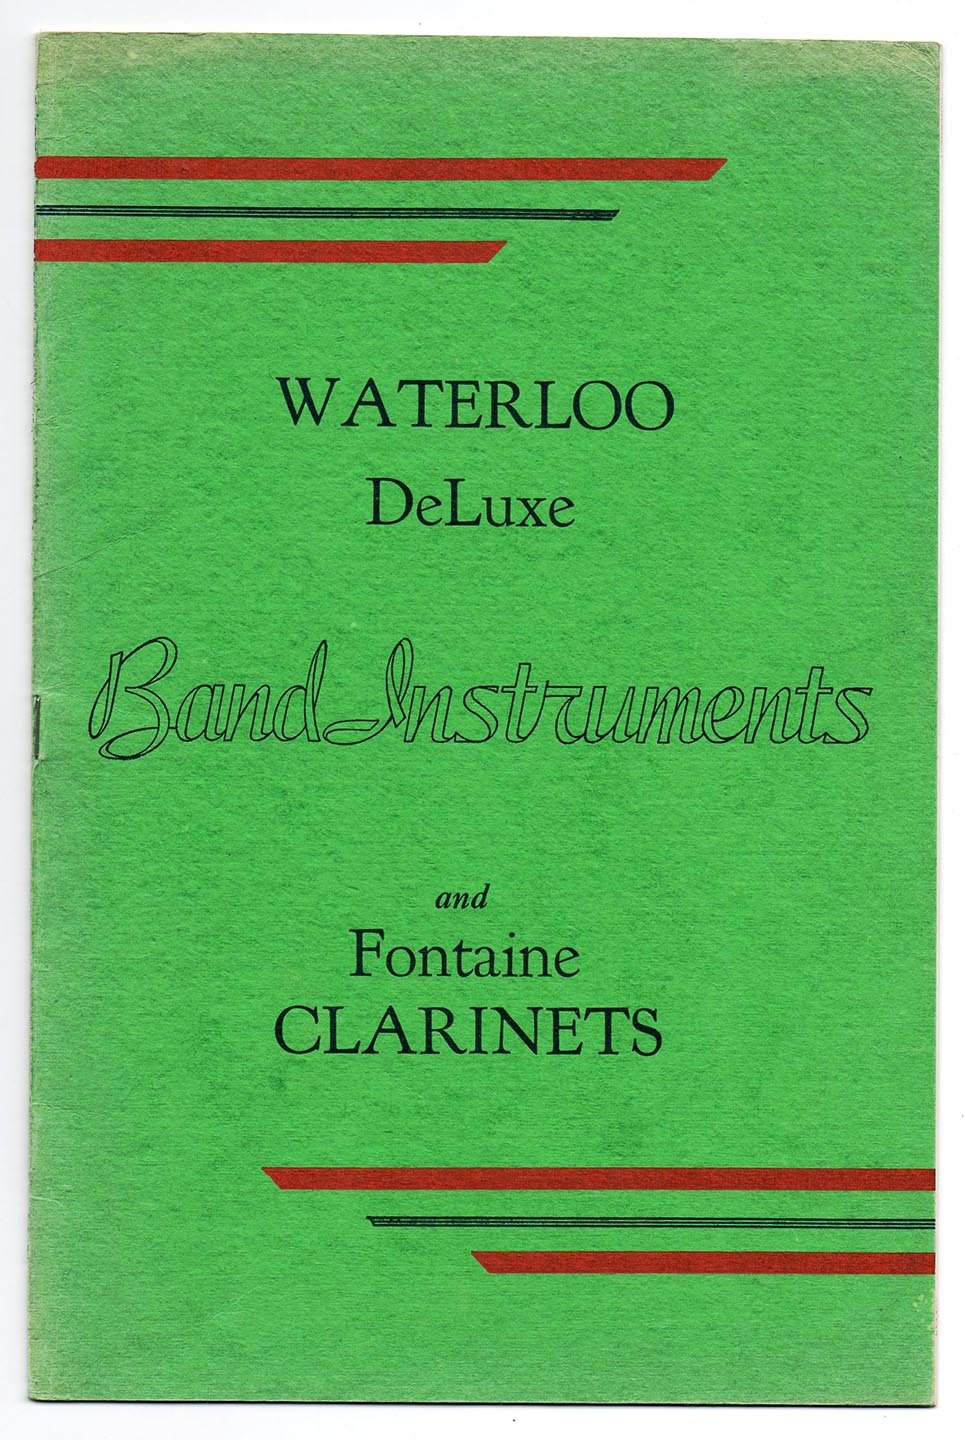 Waterloo DeLuxe Band Instruments and Fontaine Clarinets